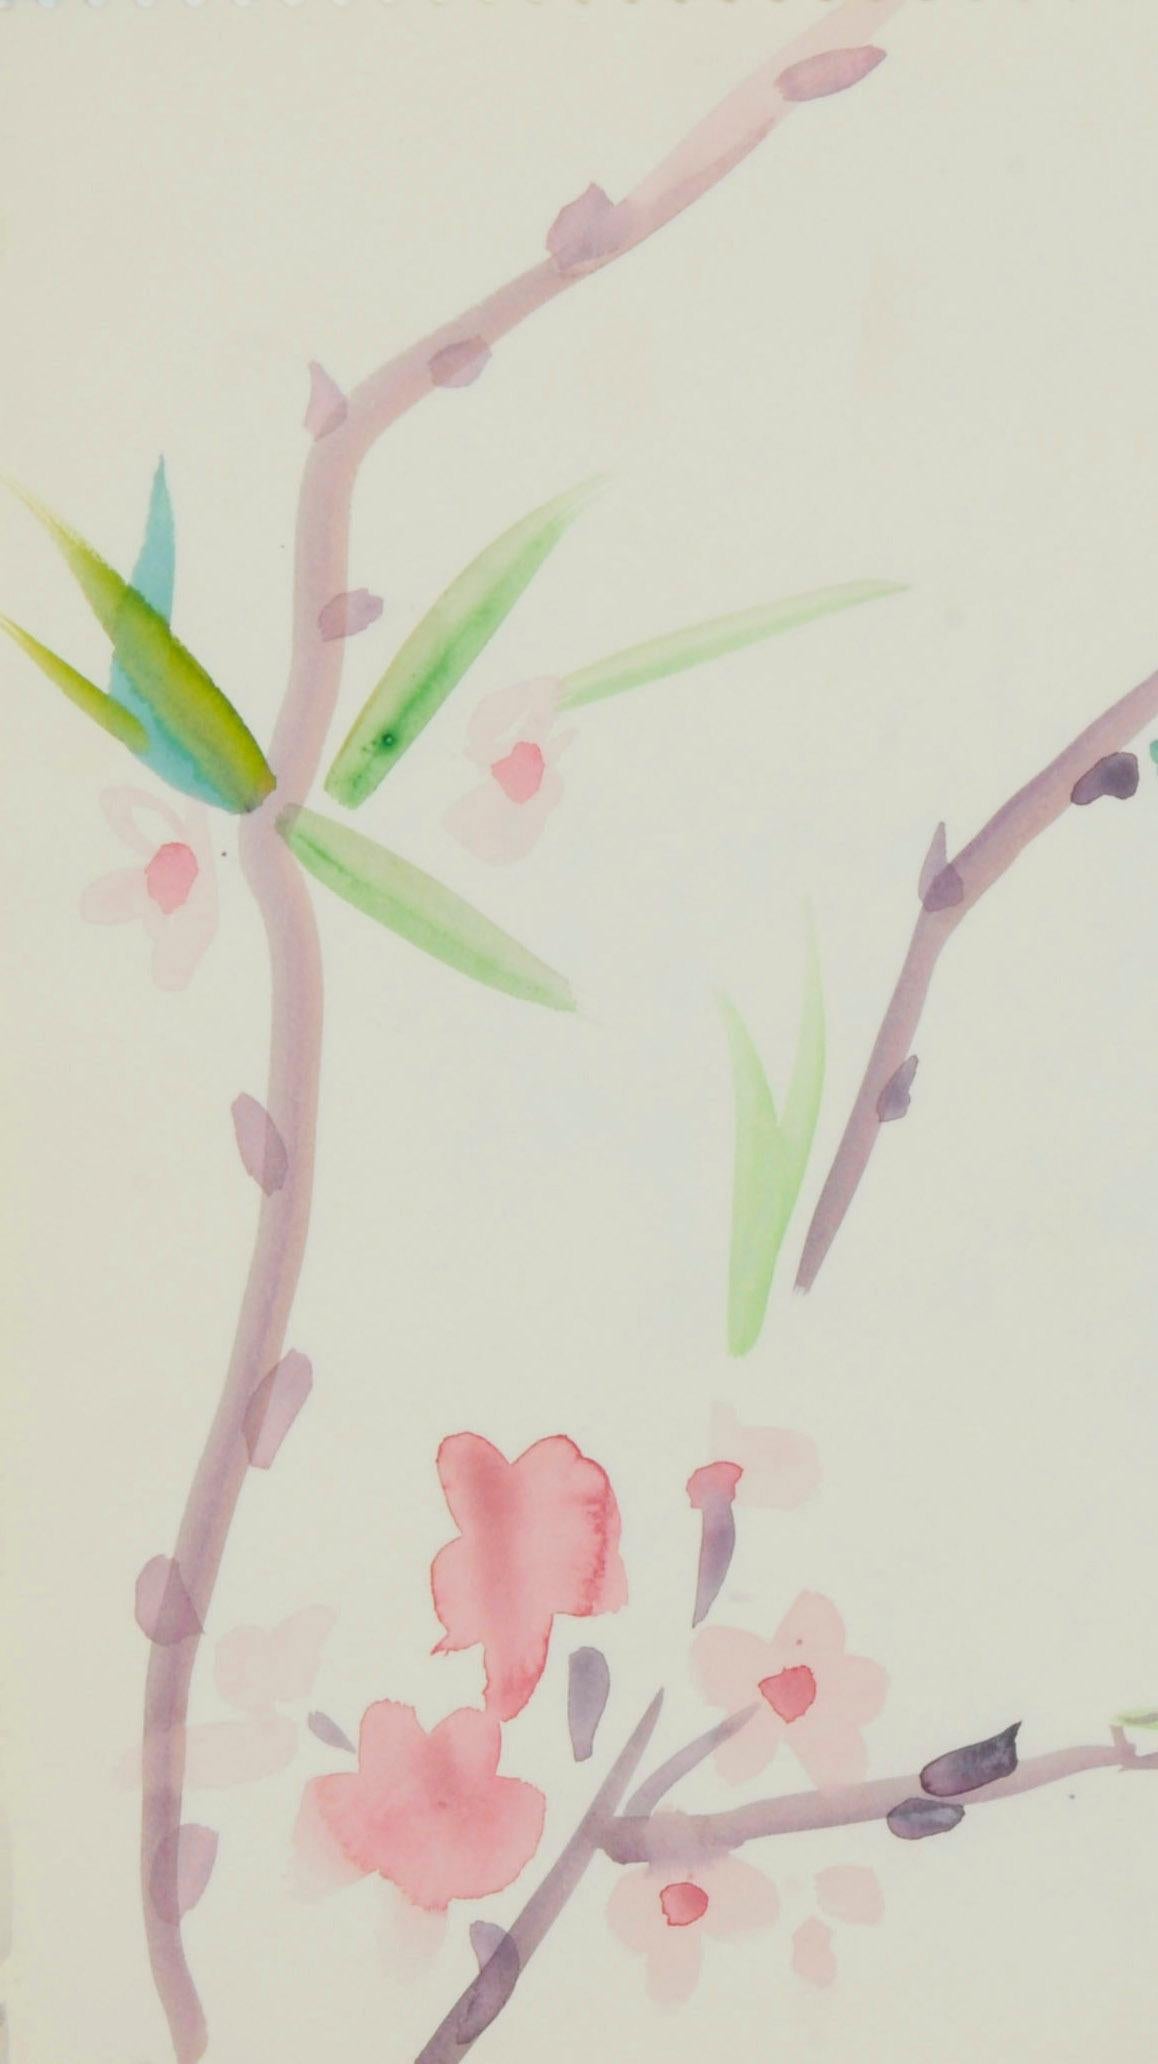 Plum Branches and Flowers
watercolor on wove paper, 1985
Signed and dated in pencil lower right corner
From the artist's 1985 sketchbook
Inspired by O'Sickey's love of Japanese and Chinese art and calligraphy.
Provenance: Estate of the